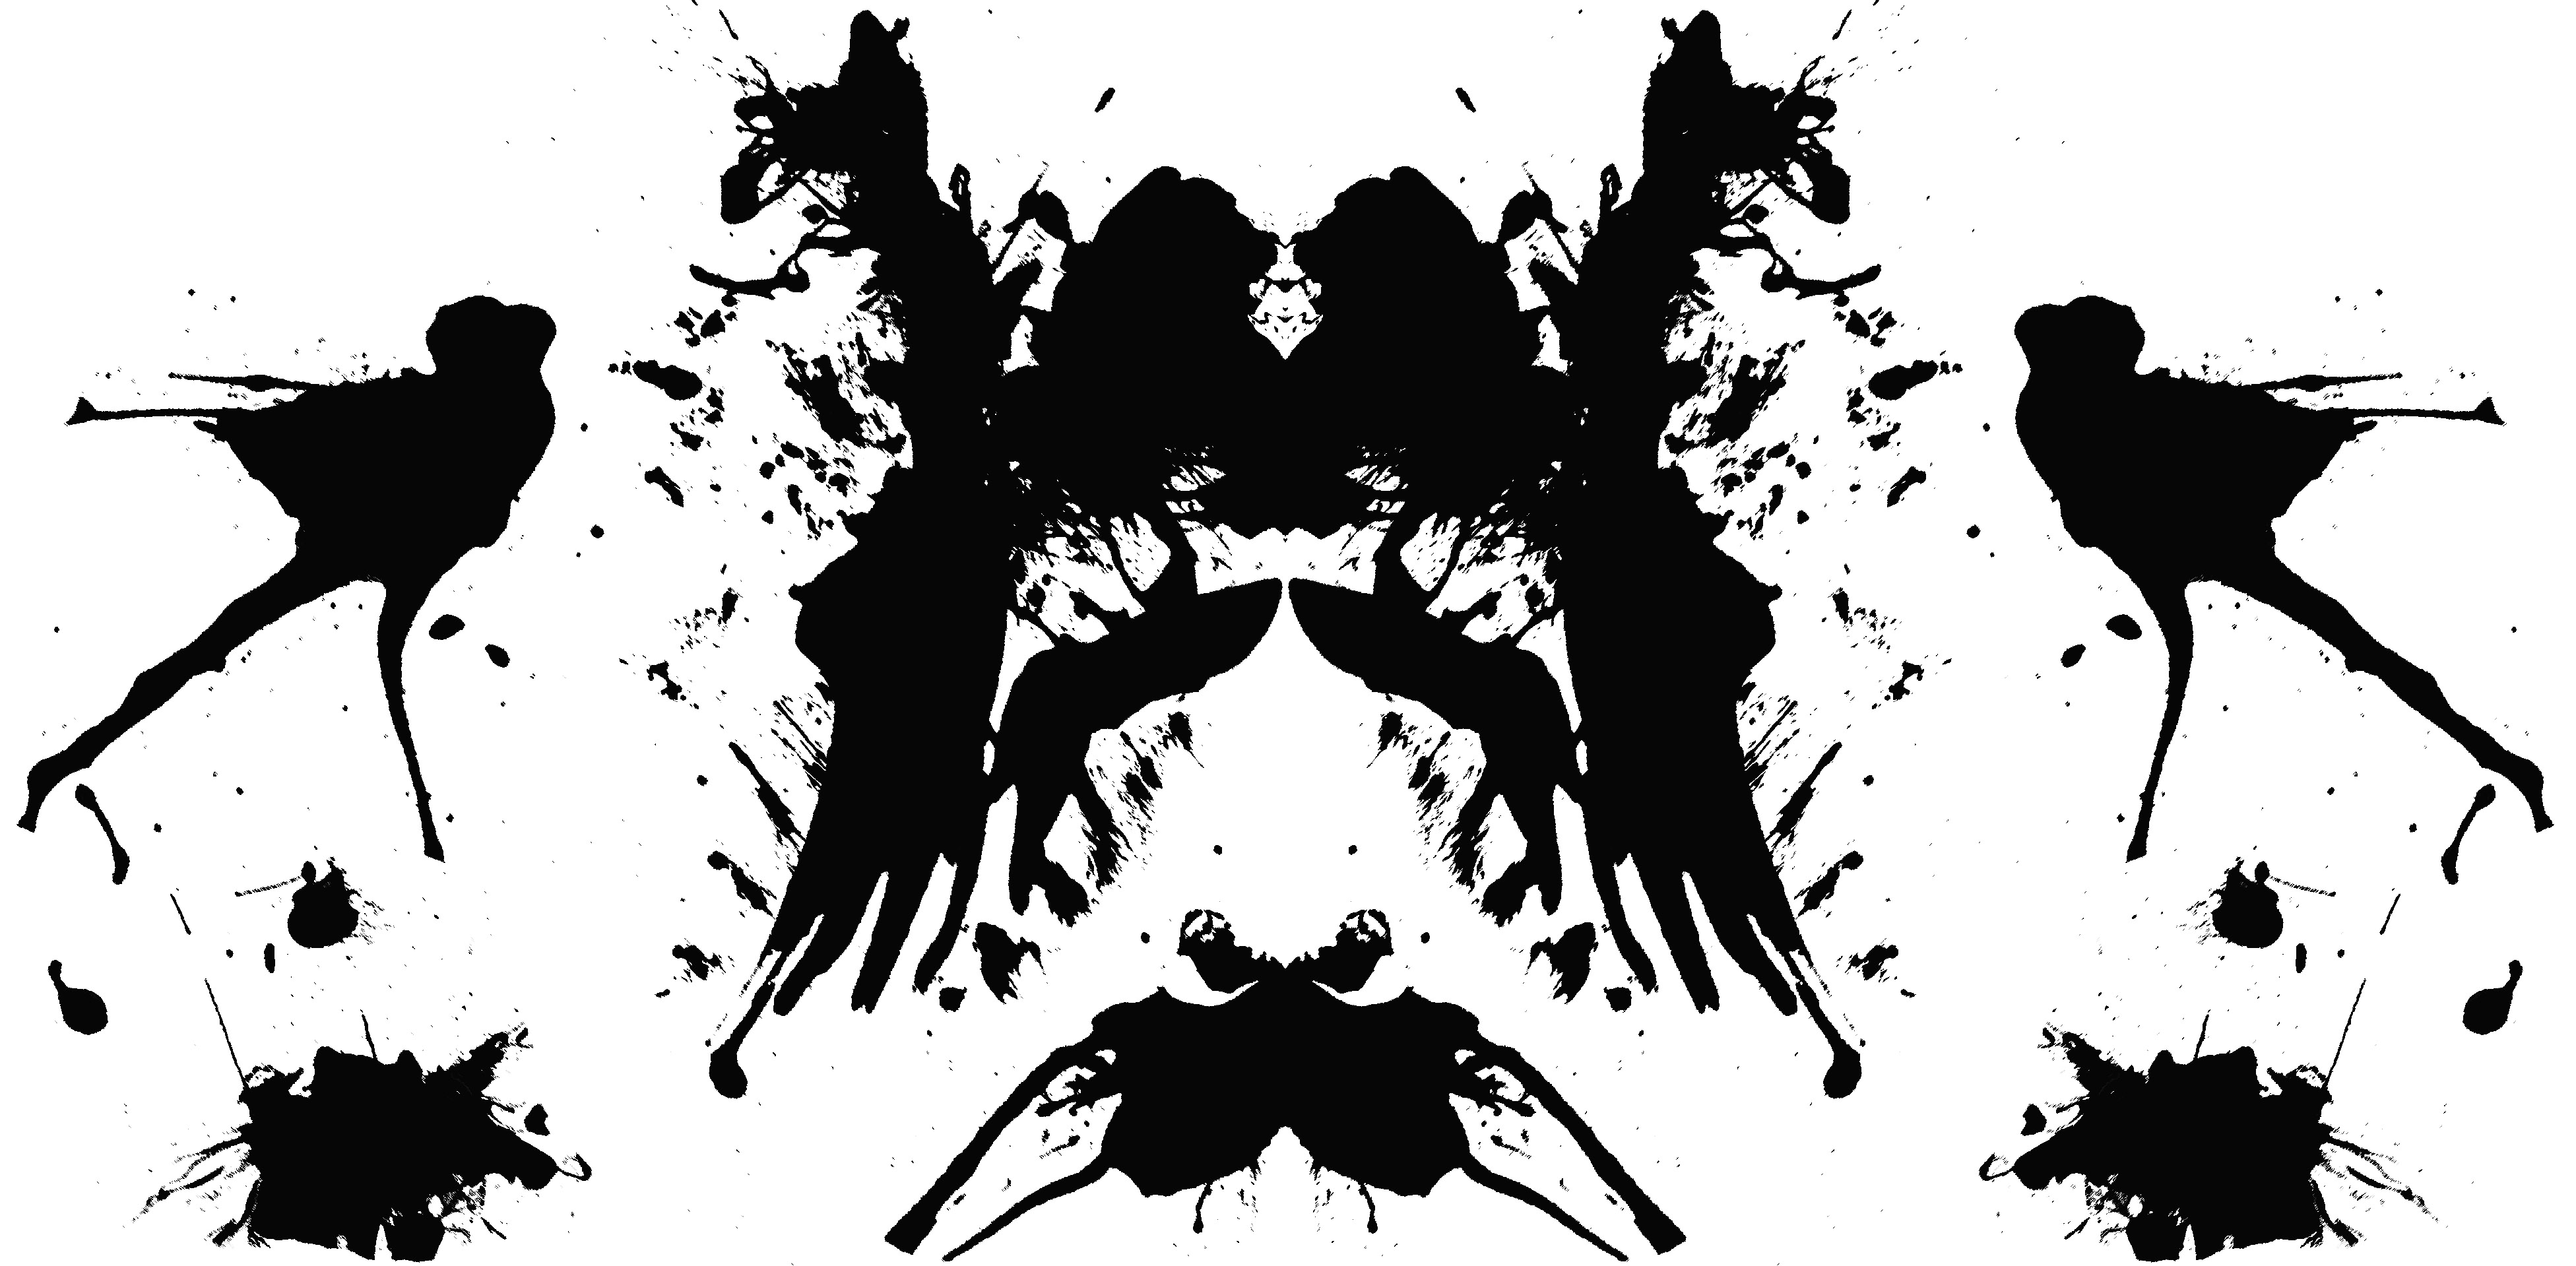 The Jewish history of the Rorschach inkblot test